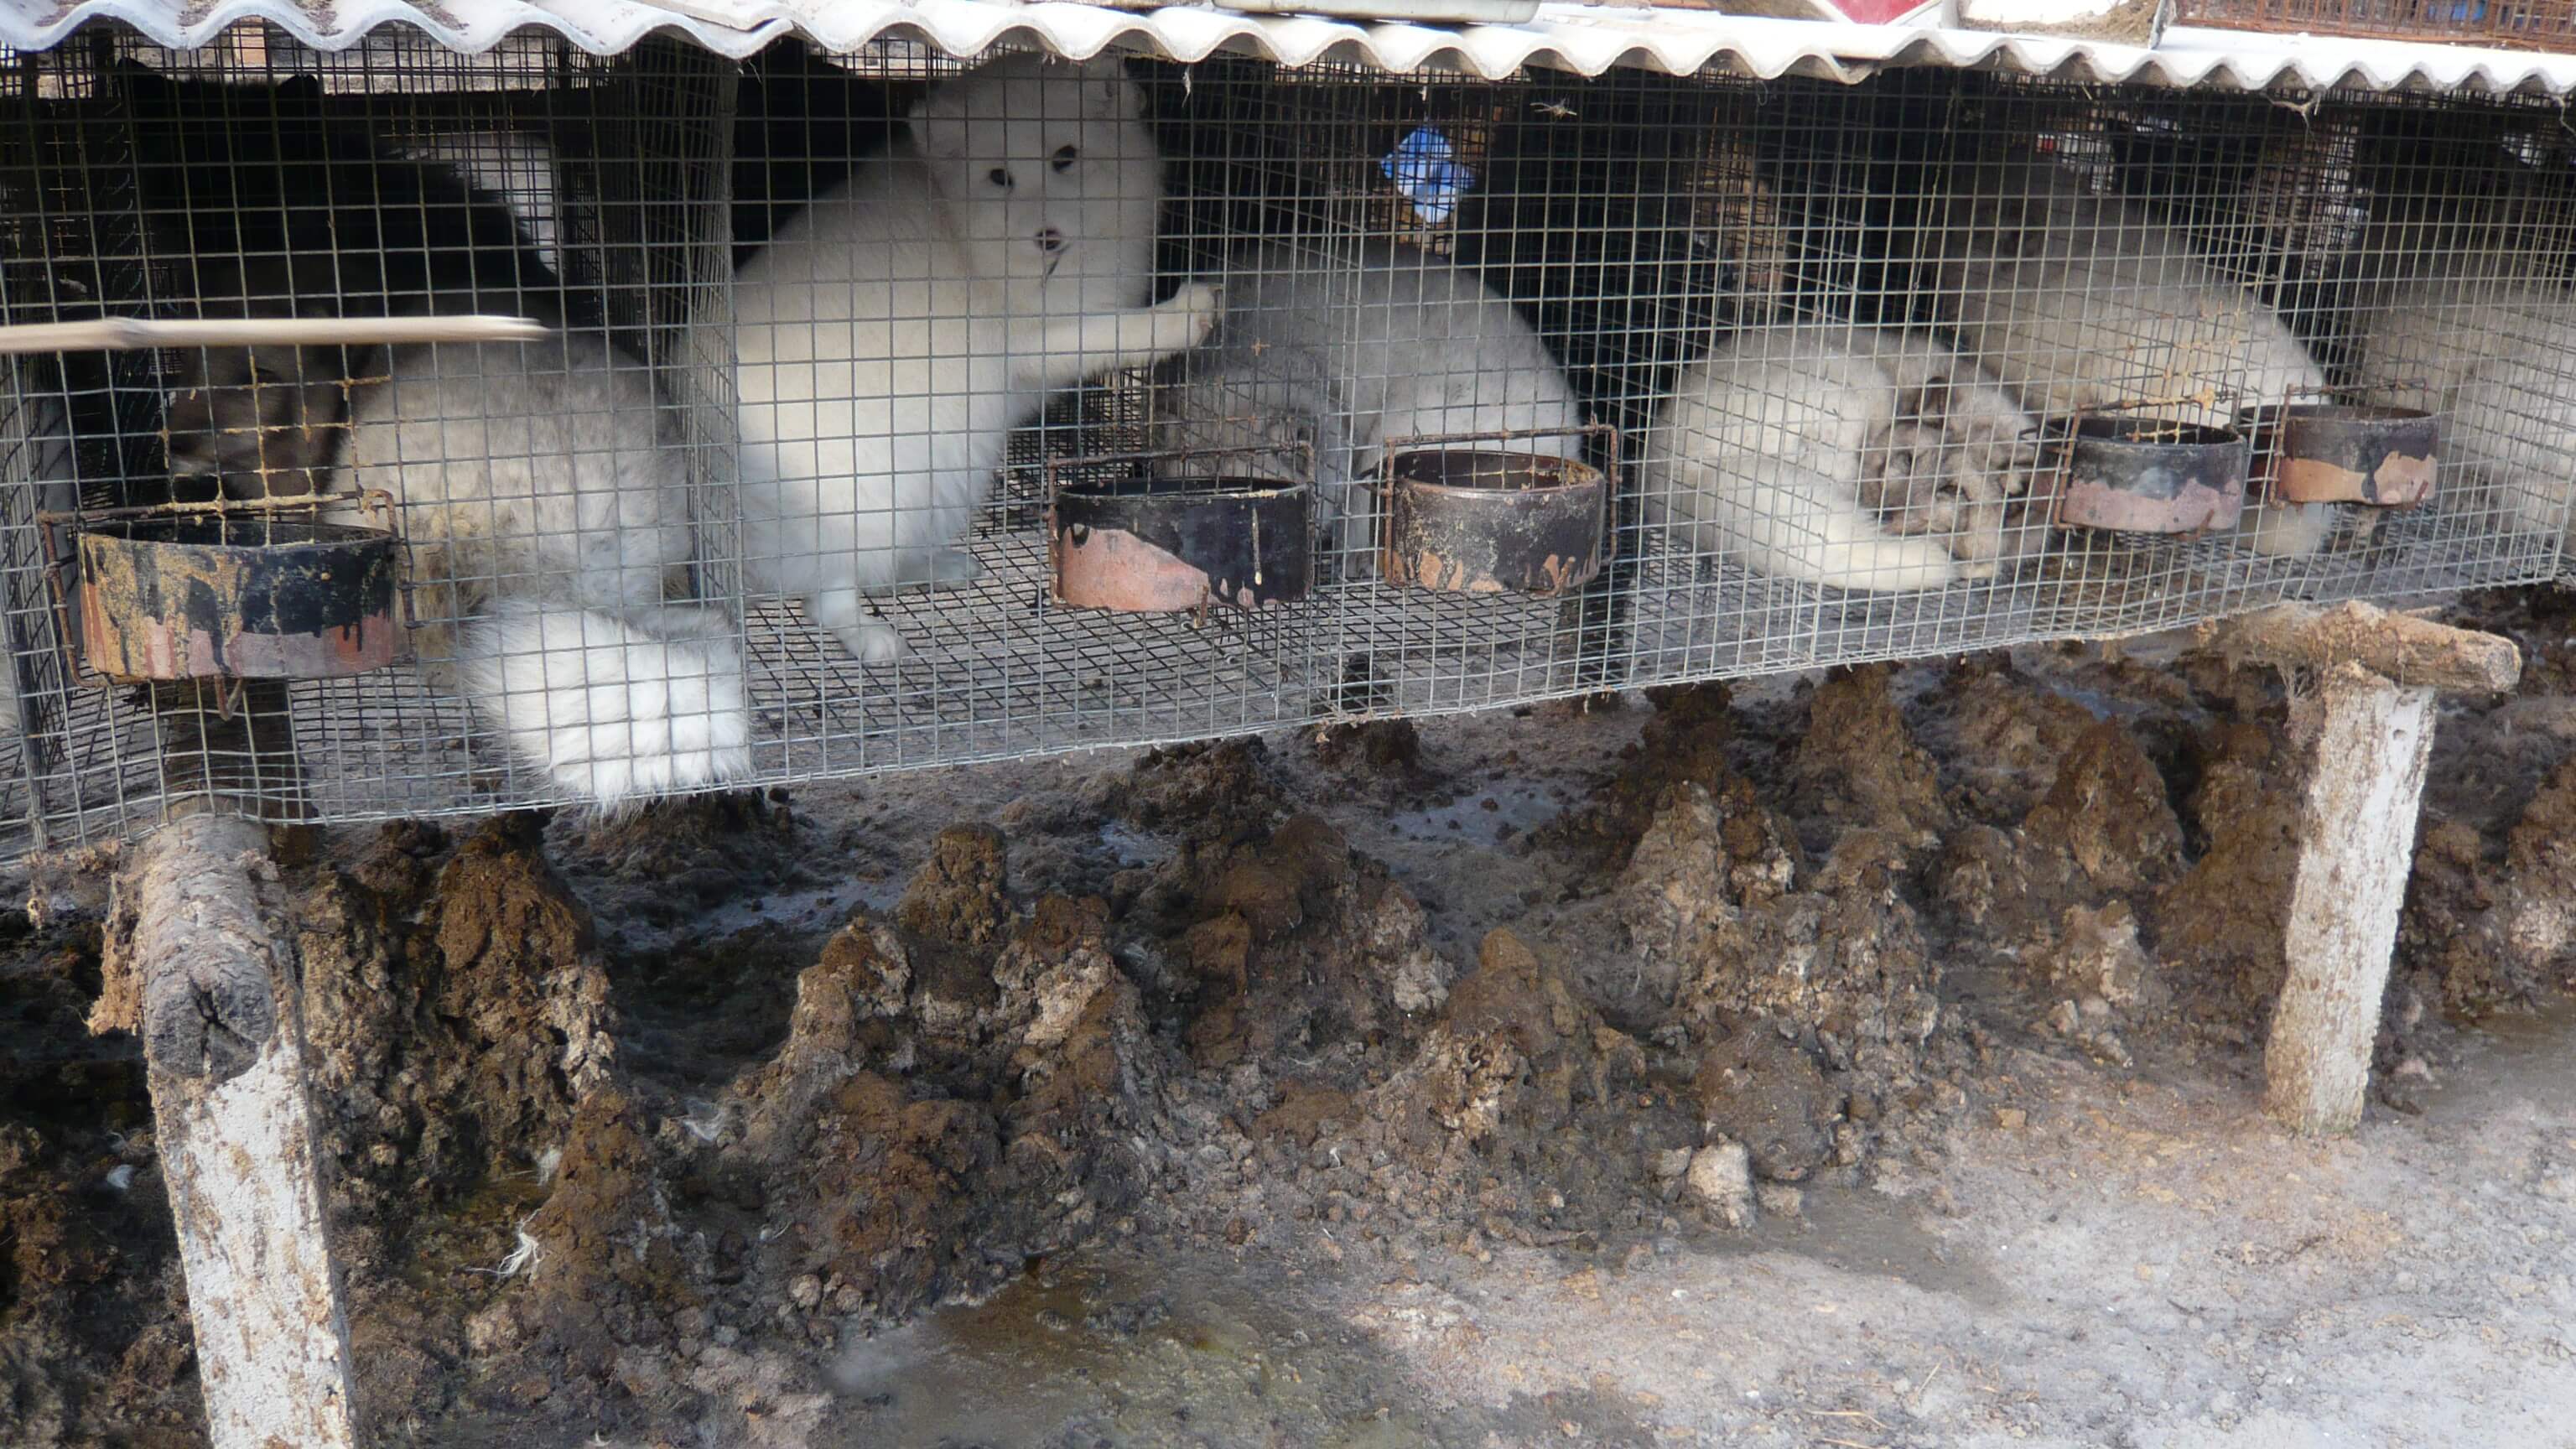 Fur farm investigation December 2012. White foxes in cages.